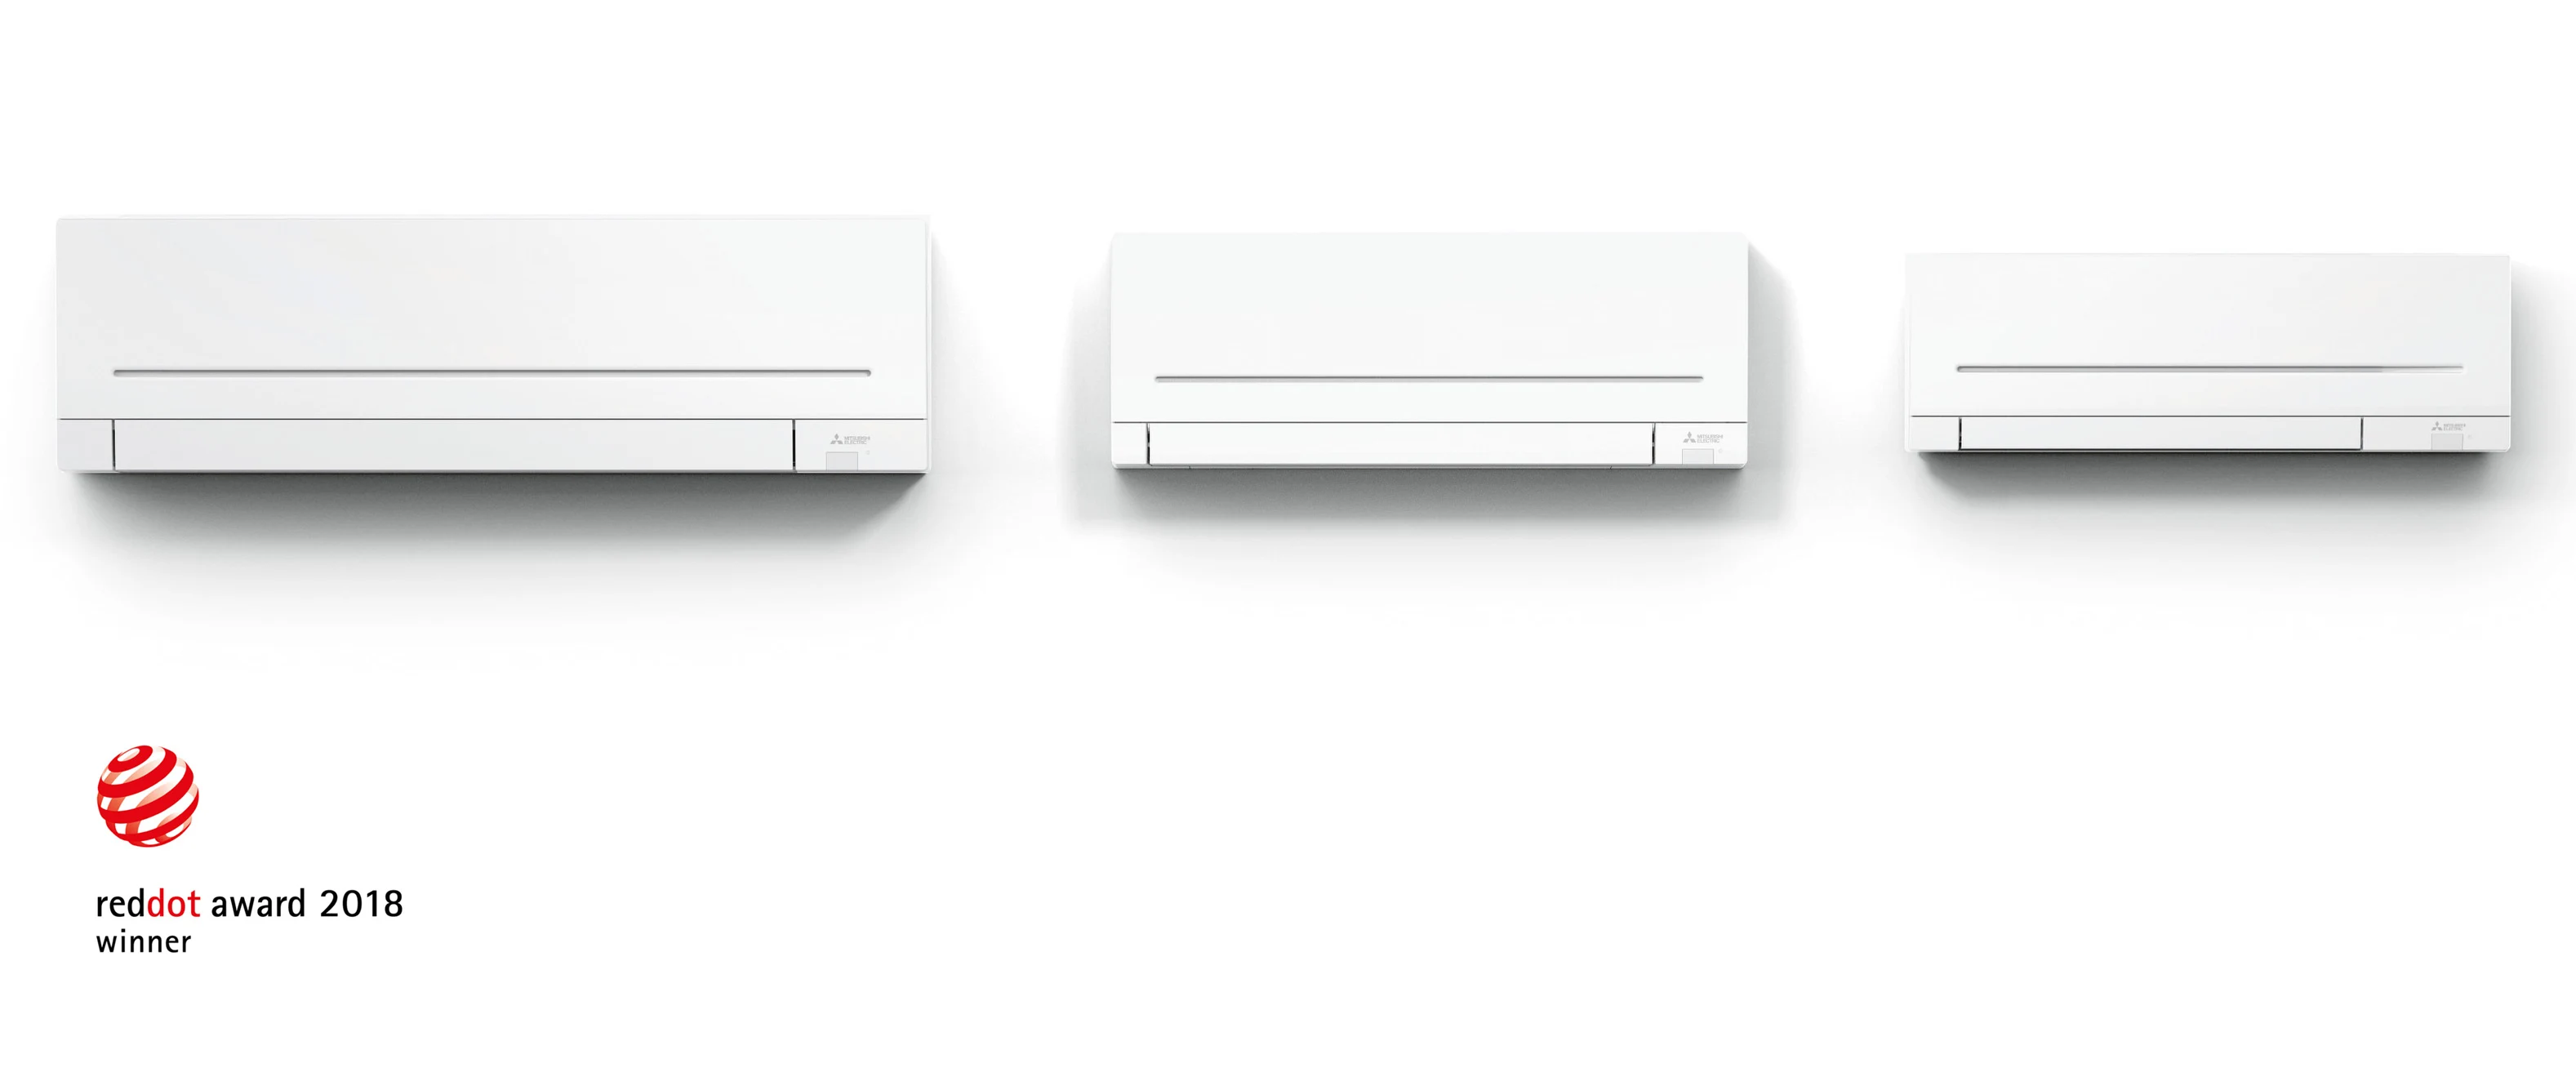 photo of 3 mitsubishi split system indoor units with 3 different sizes and the reddot award award 2018 certification logo 